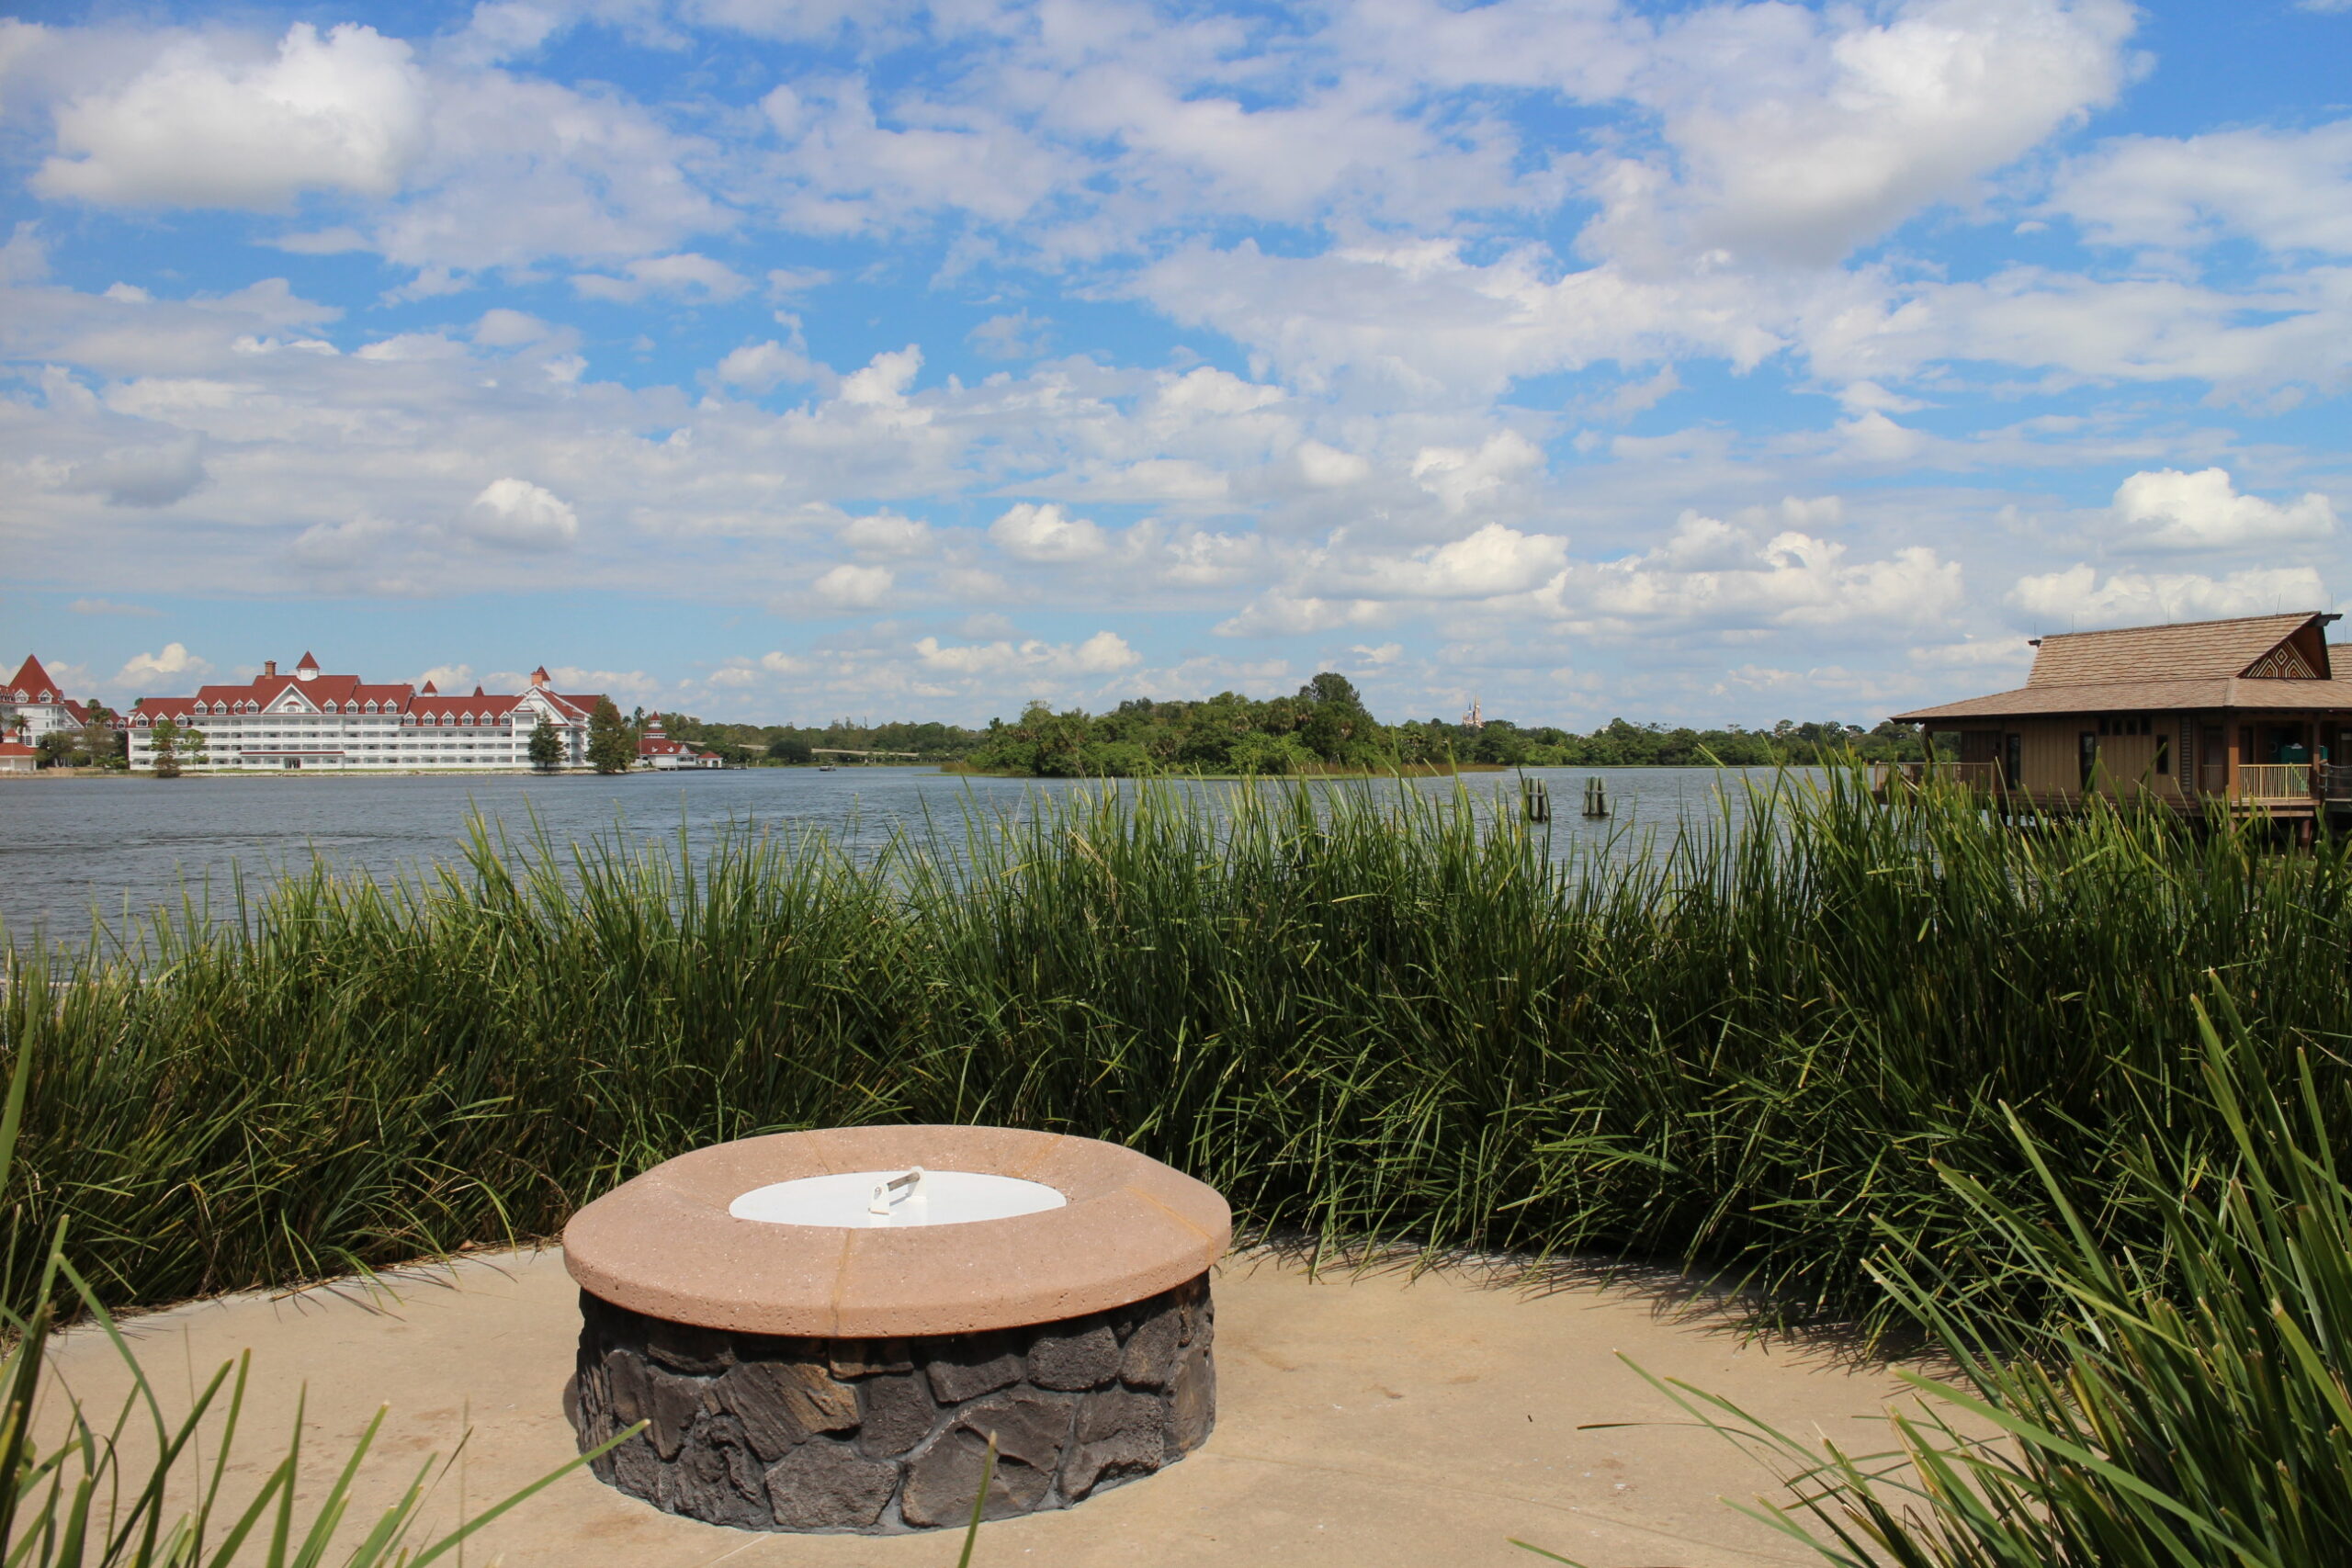 A built in fire pit on the Polynesian Beach surrounded by tall grasses overlooking the lake, blue skies and the Grand Floridian far off in the distance